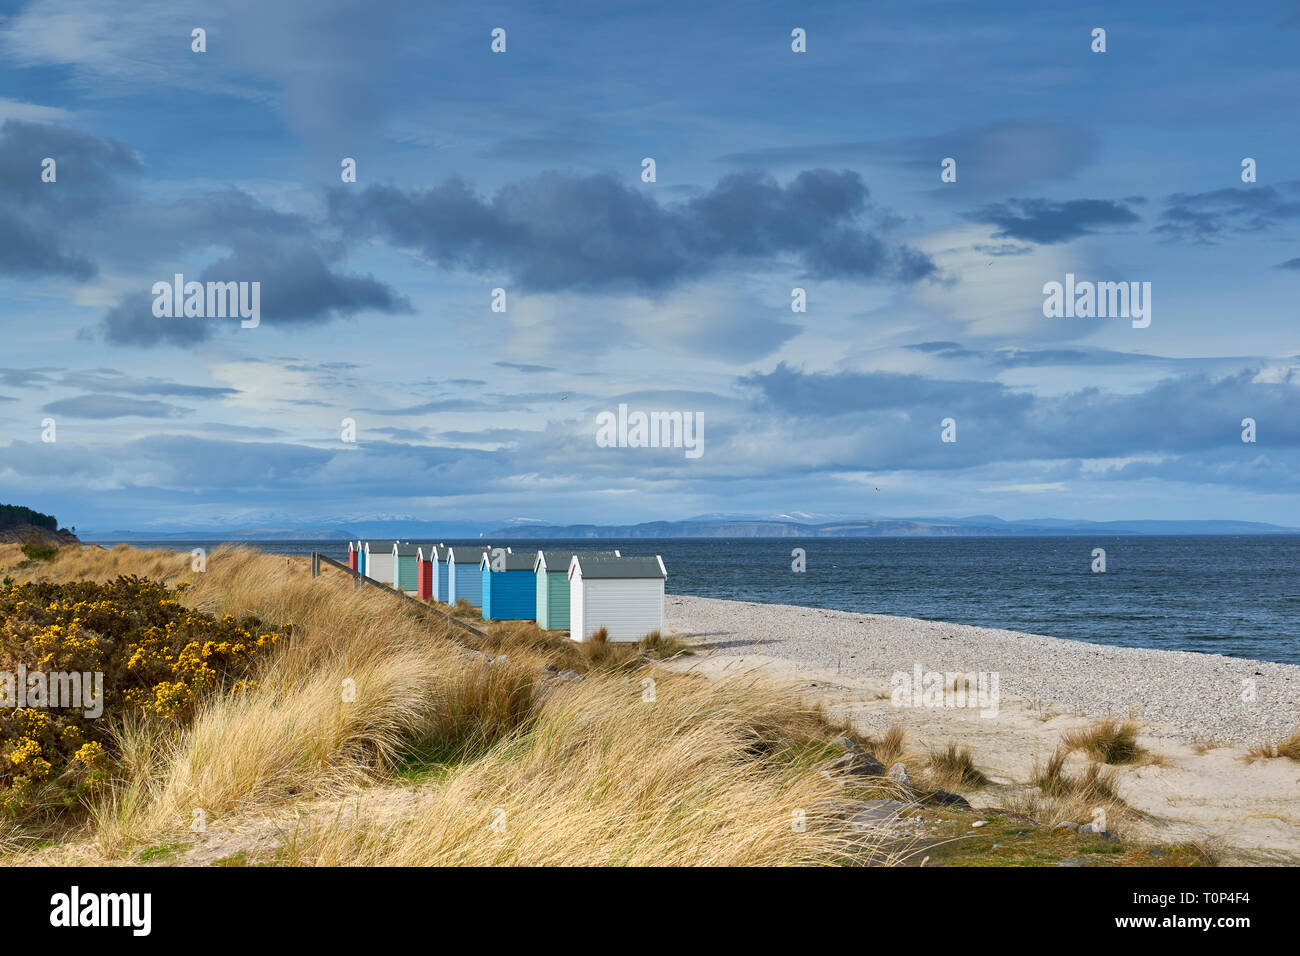 FINDHORN BEACH MORAY FIRTH SCOTLAND COLOURED CHALETS OR BEACH HUTS ON PEBBLE BEACH SNOW OVER THE HILLS AND BLACK ISLE Stock Photo